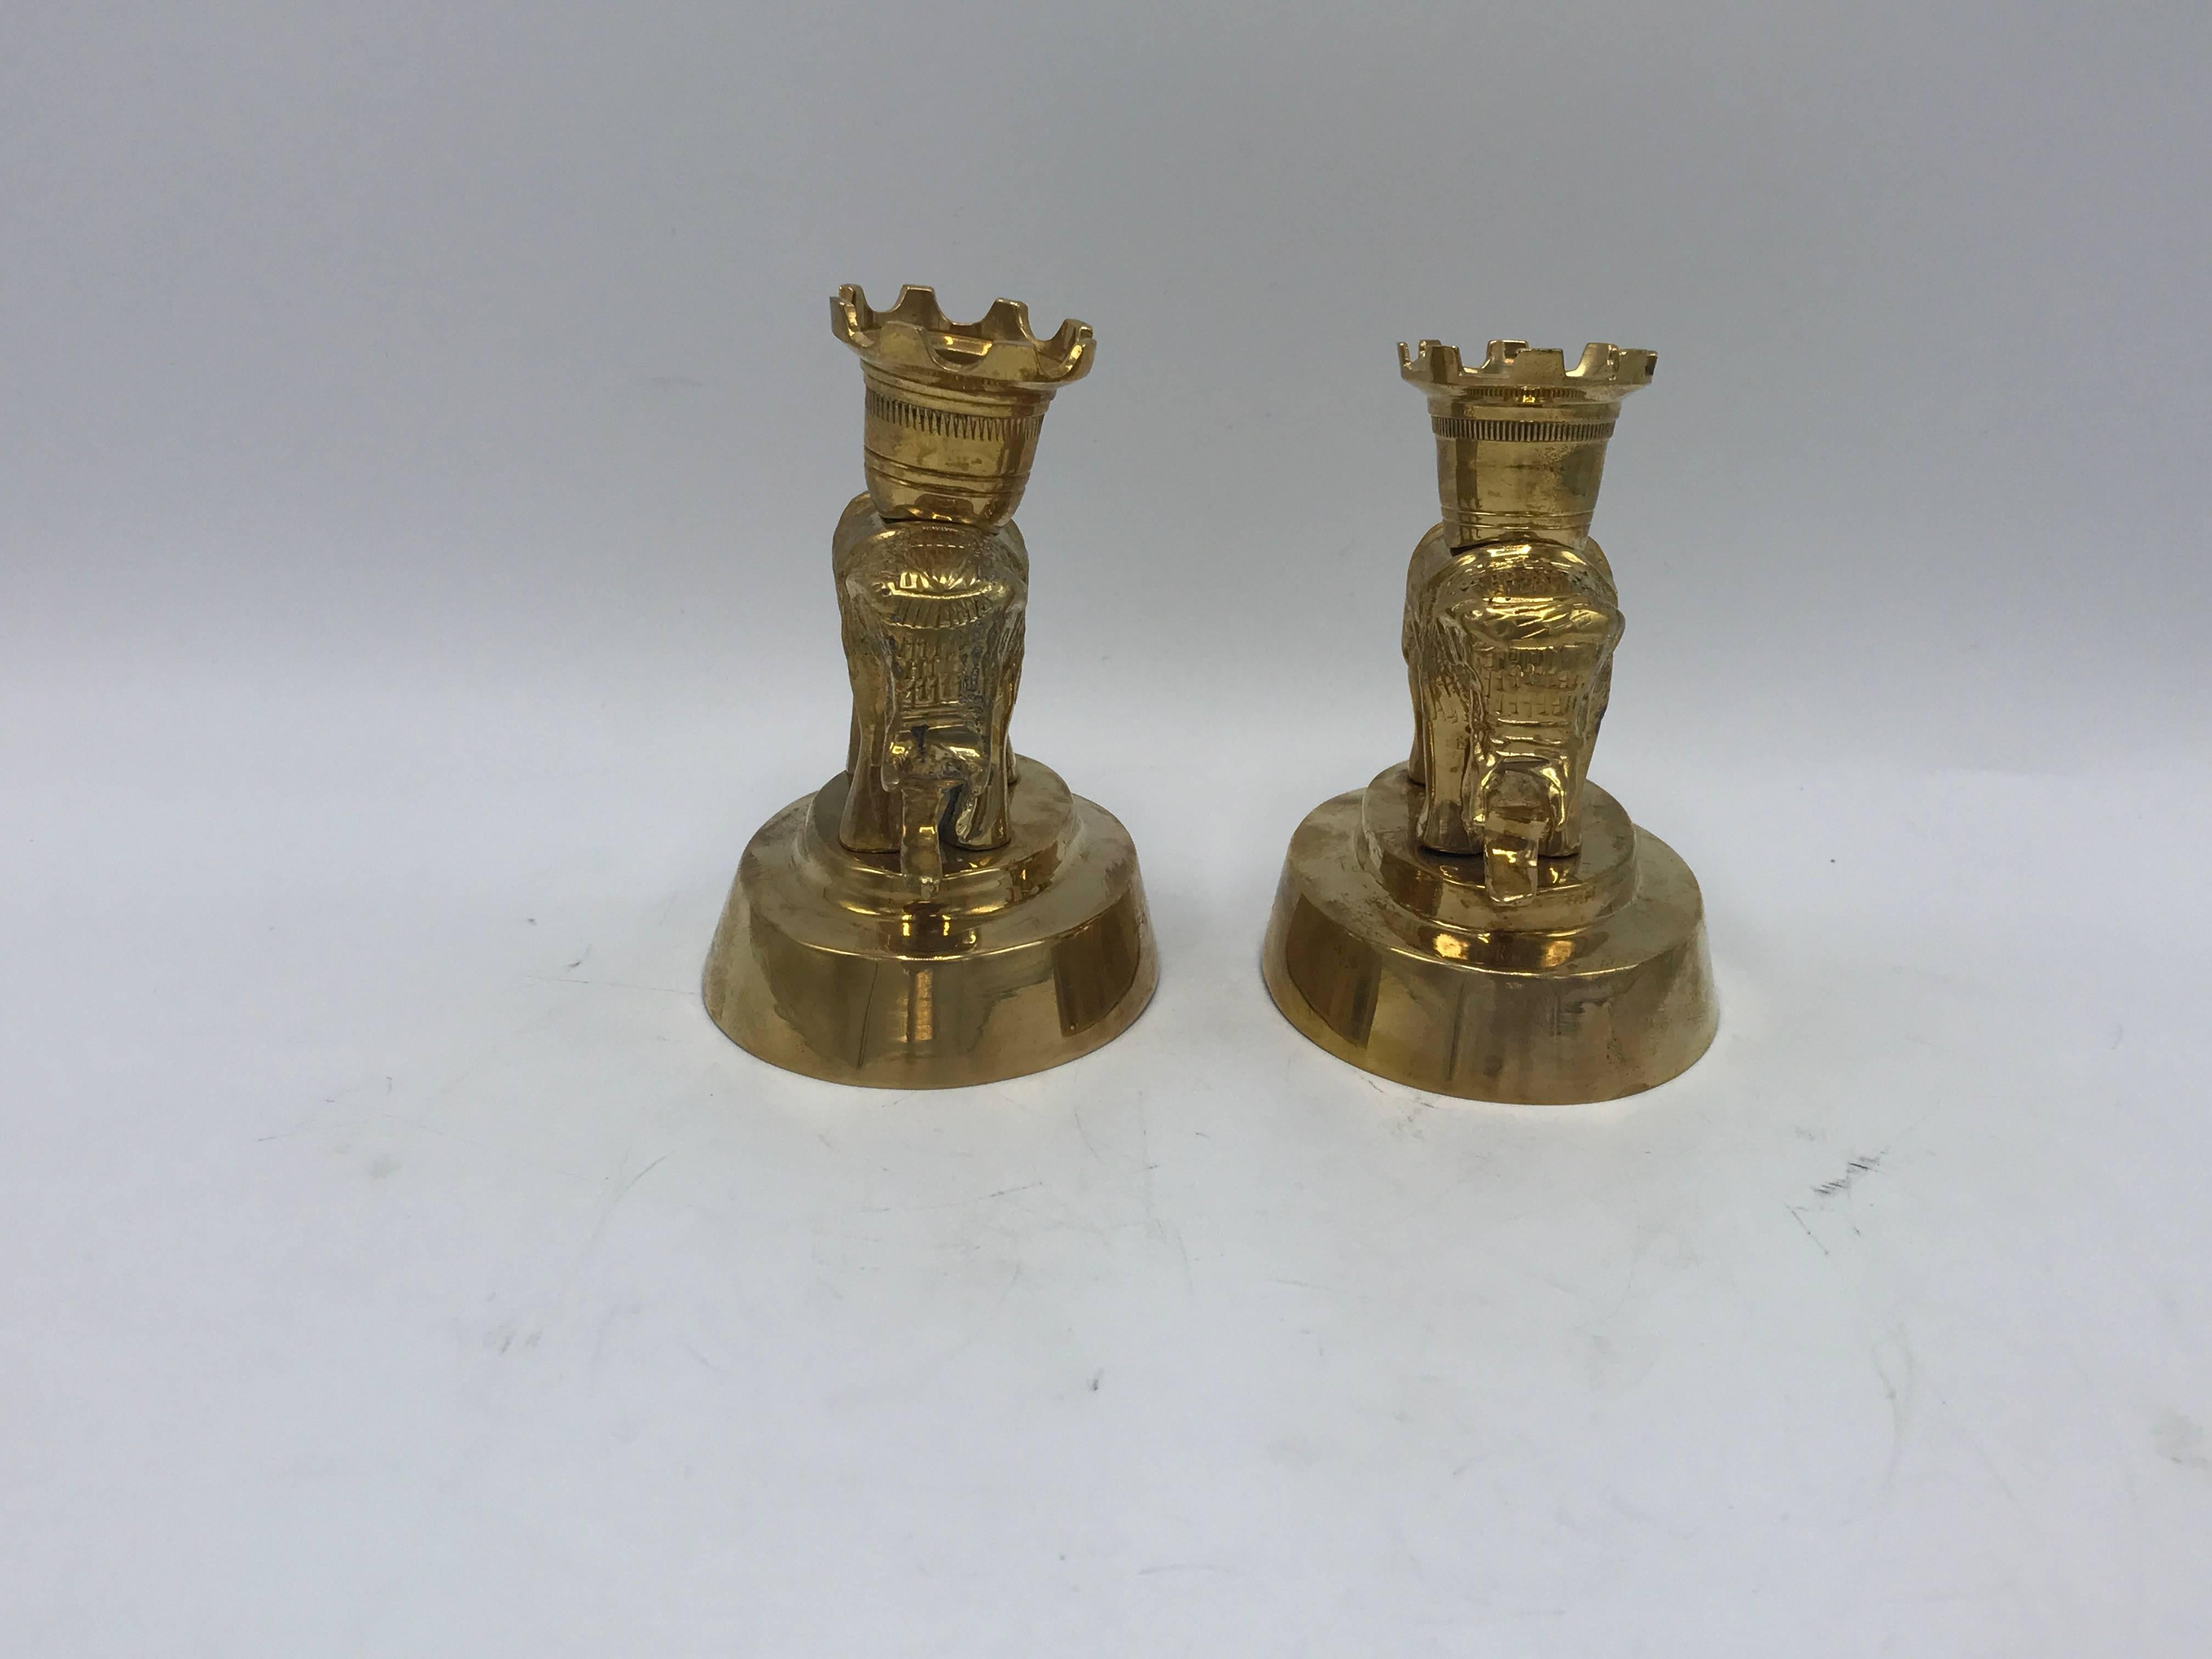 Offered is a beautiful, pair of 1970s Mottahedeh solid-brass elephant sculpture candlestick holders. Original tag on underside of one elephant. Heavy.